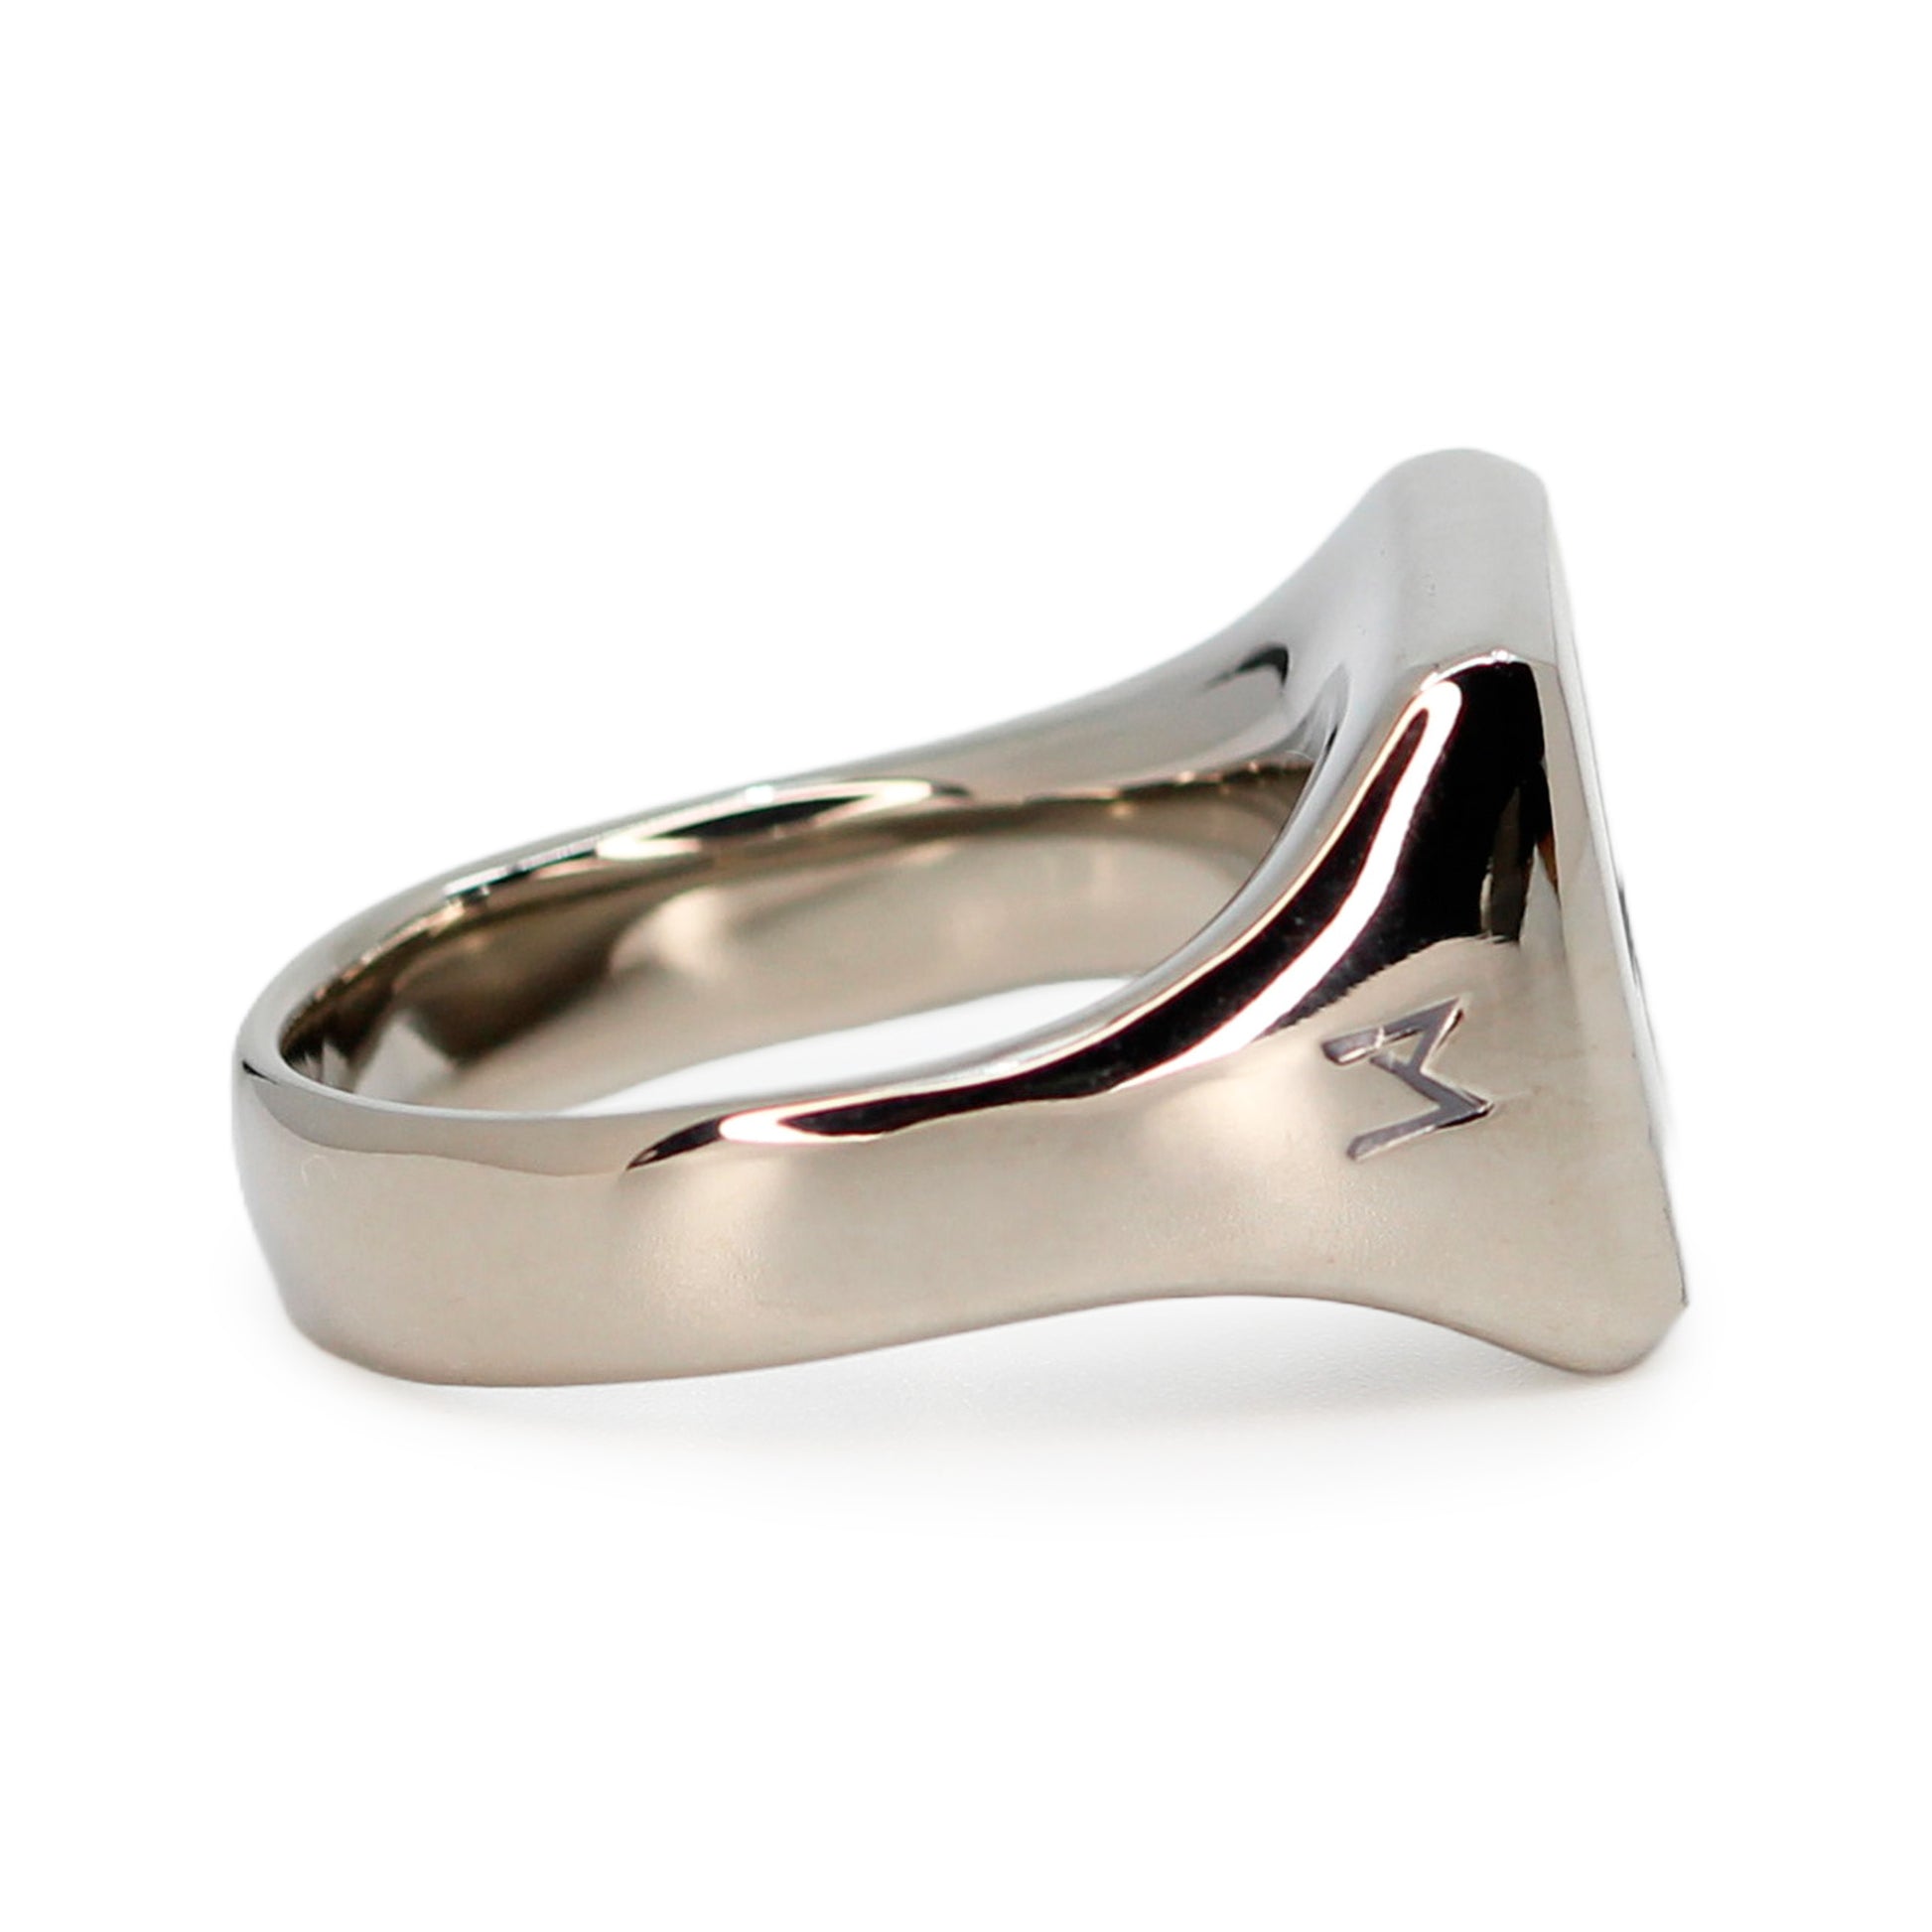 Single silver-colored titanium signet ring, 15x15 mm wide surface with an engraved shark fin. Image shows side view of the ring